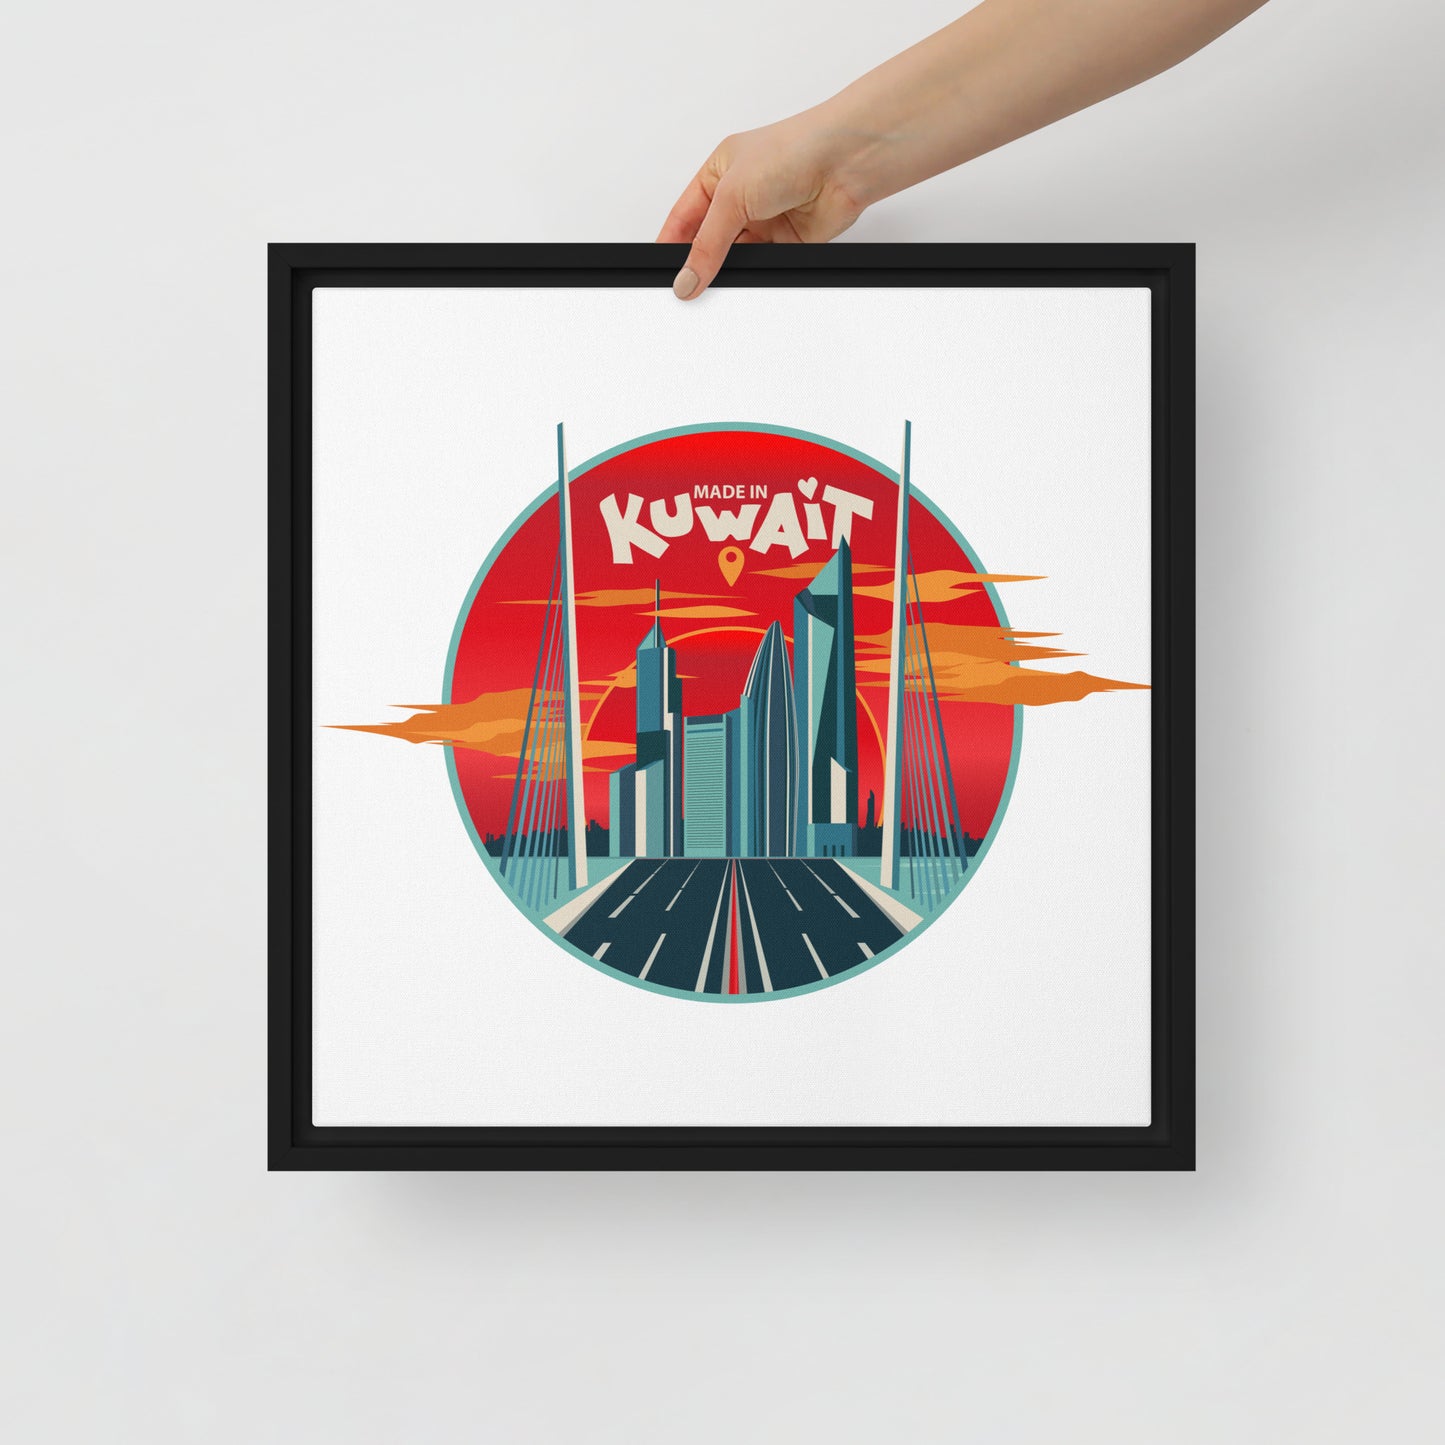 Made In Kuwait - Retro Style Illustration Of Kuwait City Skyscrapers - Framed Canvas by Craitza©